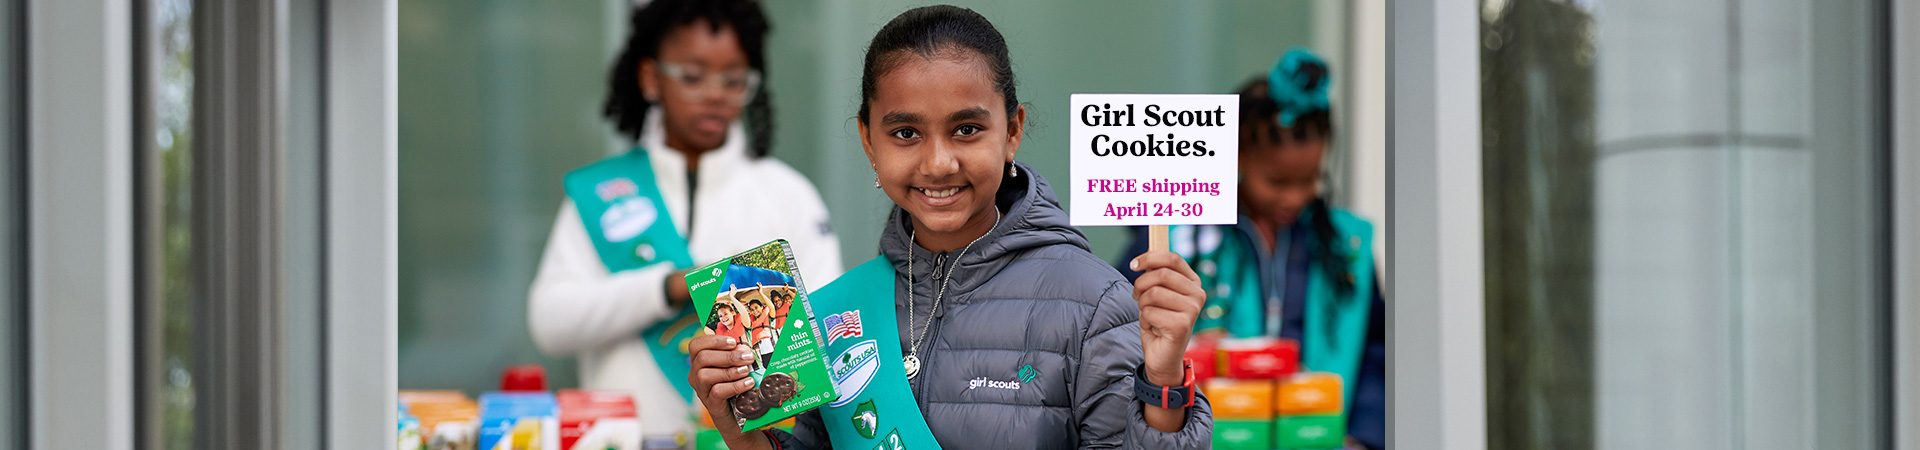  girl scouts selling cookies with one girl in front of booth holding sign that says "girl scout cookie proceeds stay local" 